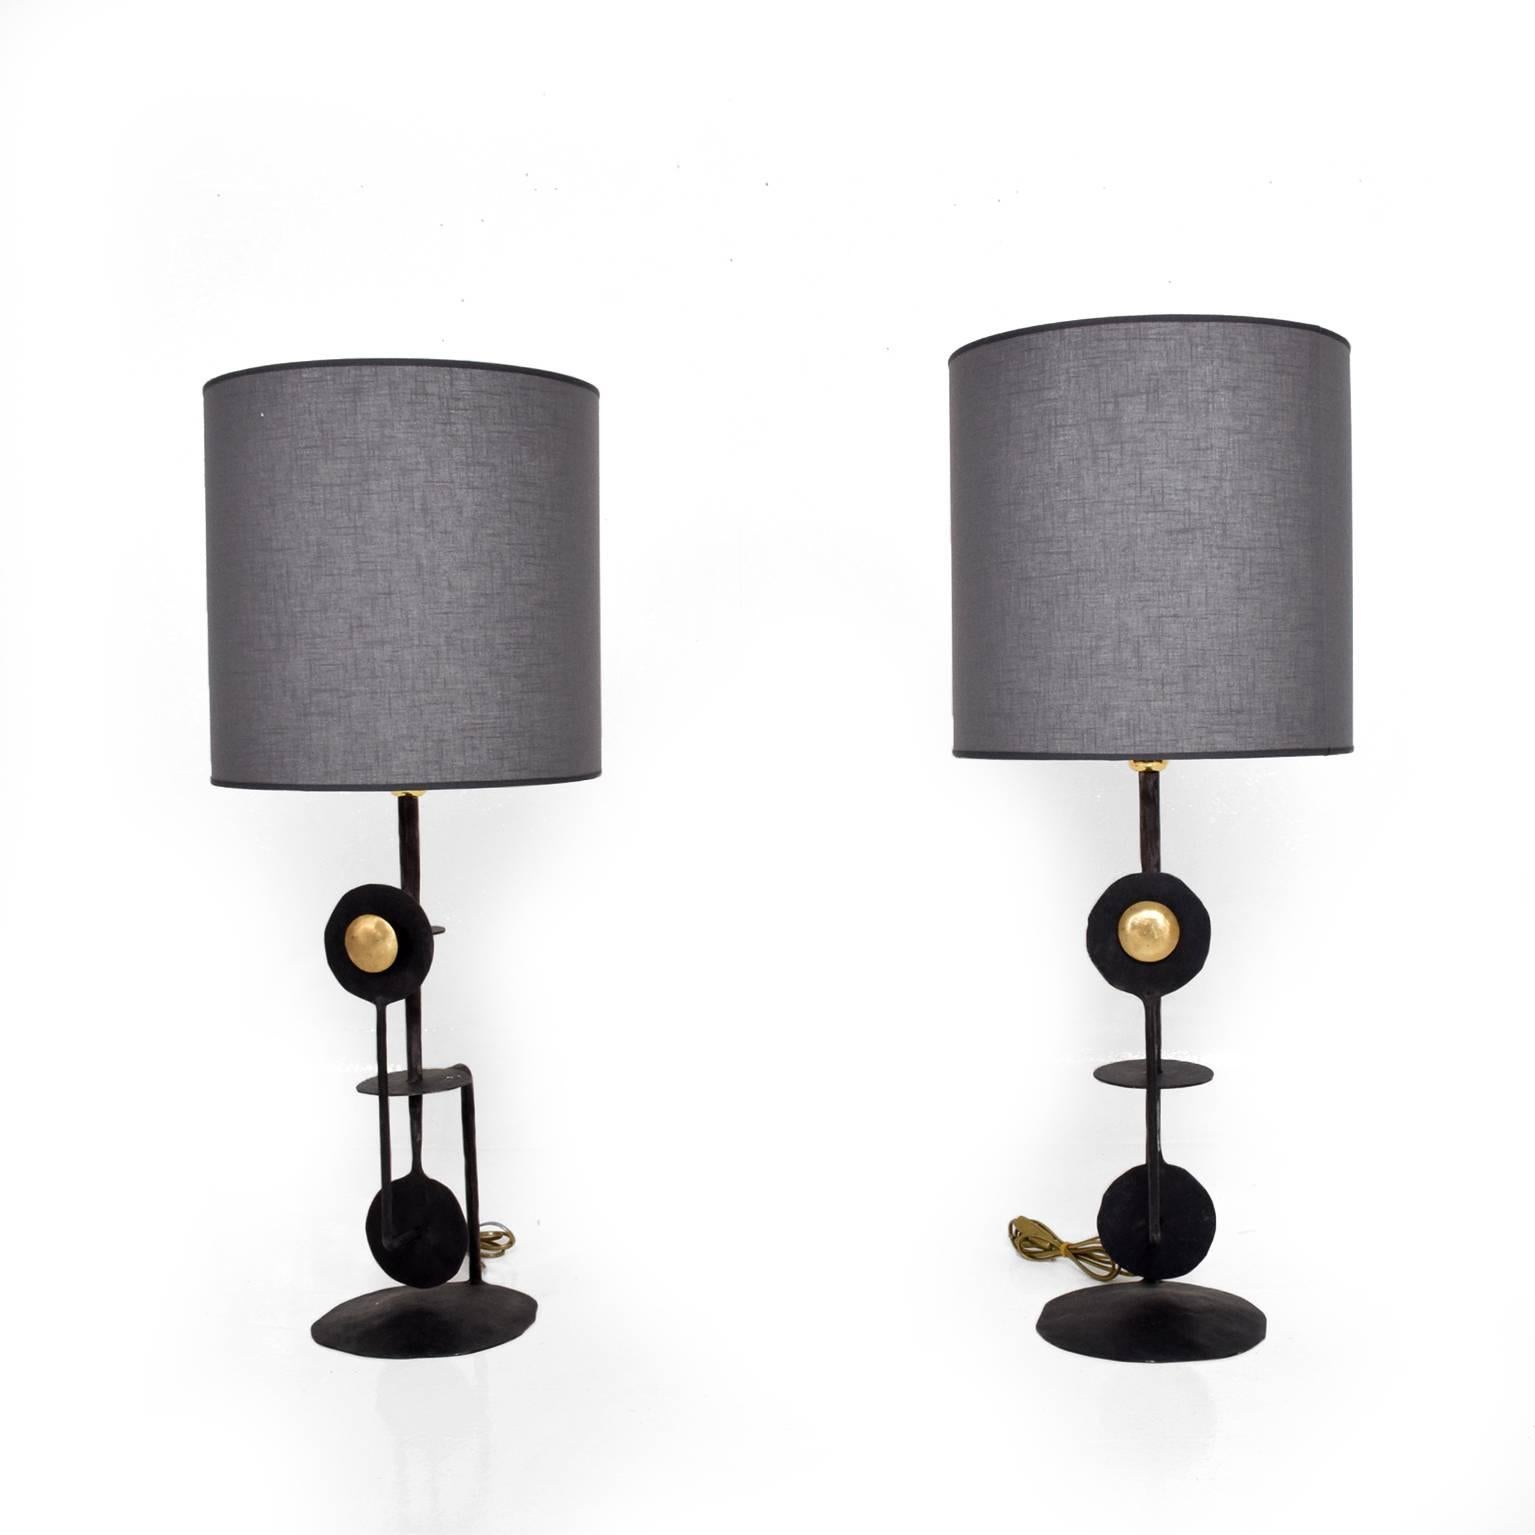 For your consideration a pair of brutalist Italian table lamps.
Constructed with forged iron painted in black with brass accent.
Italy, circa 1980s.
Dimensions: 25" height x 8" in diameter. Shade (inquiry).